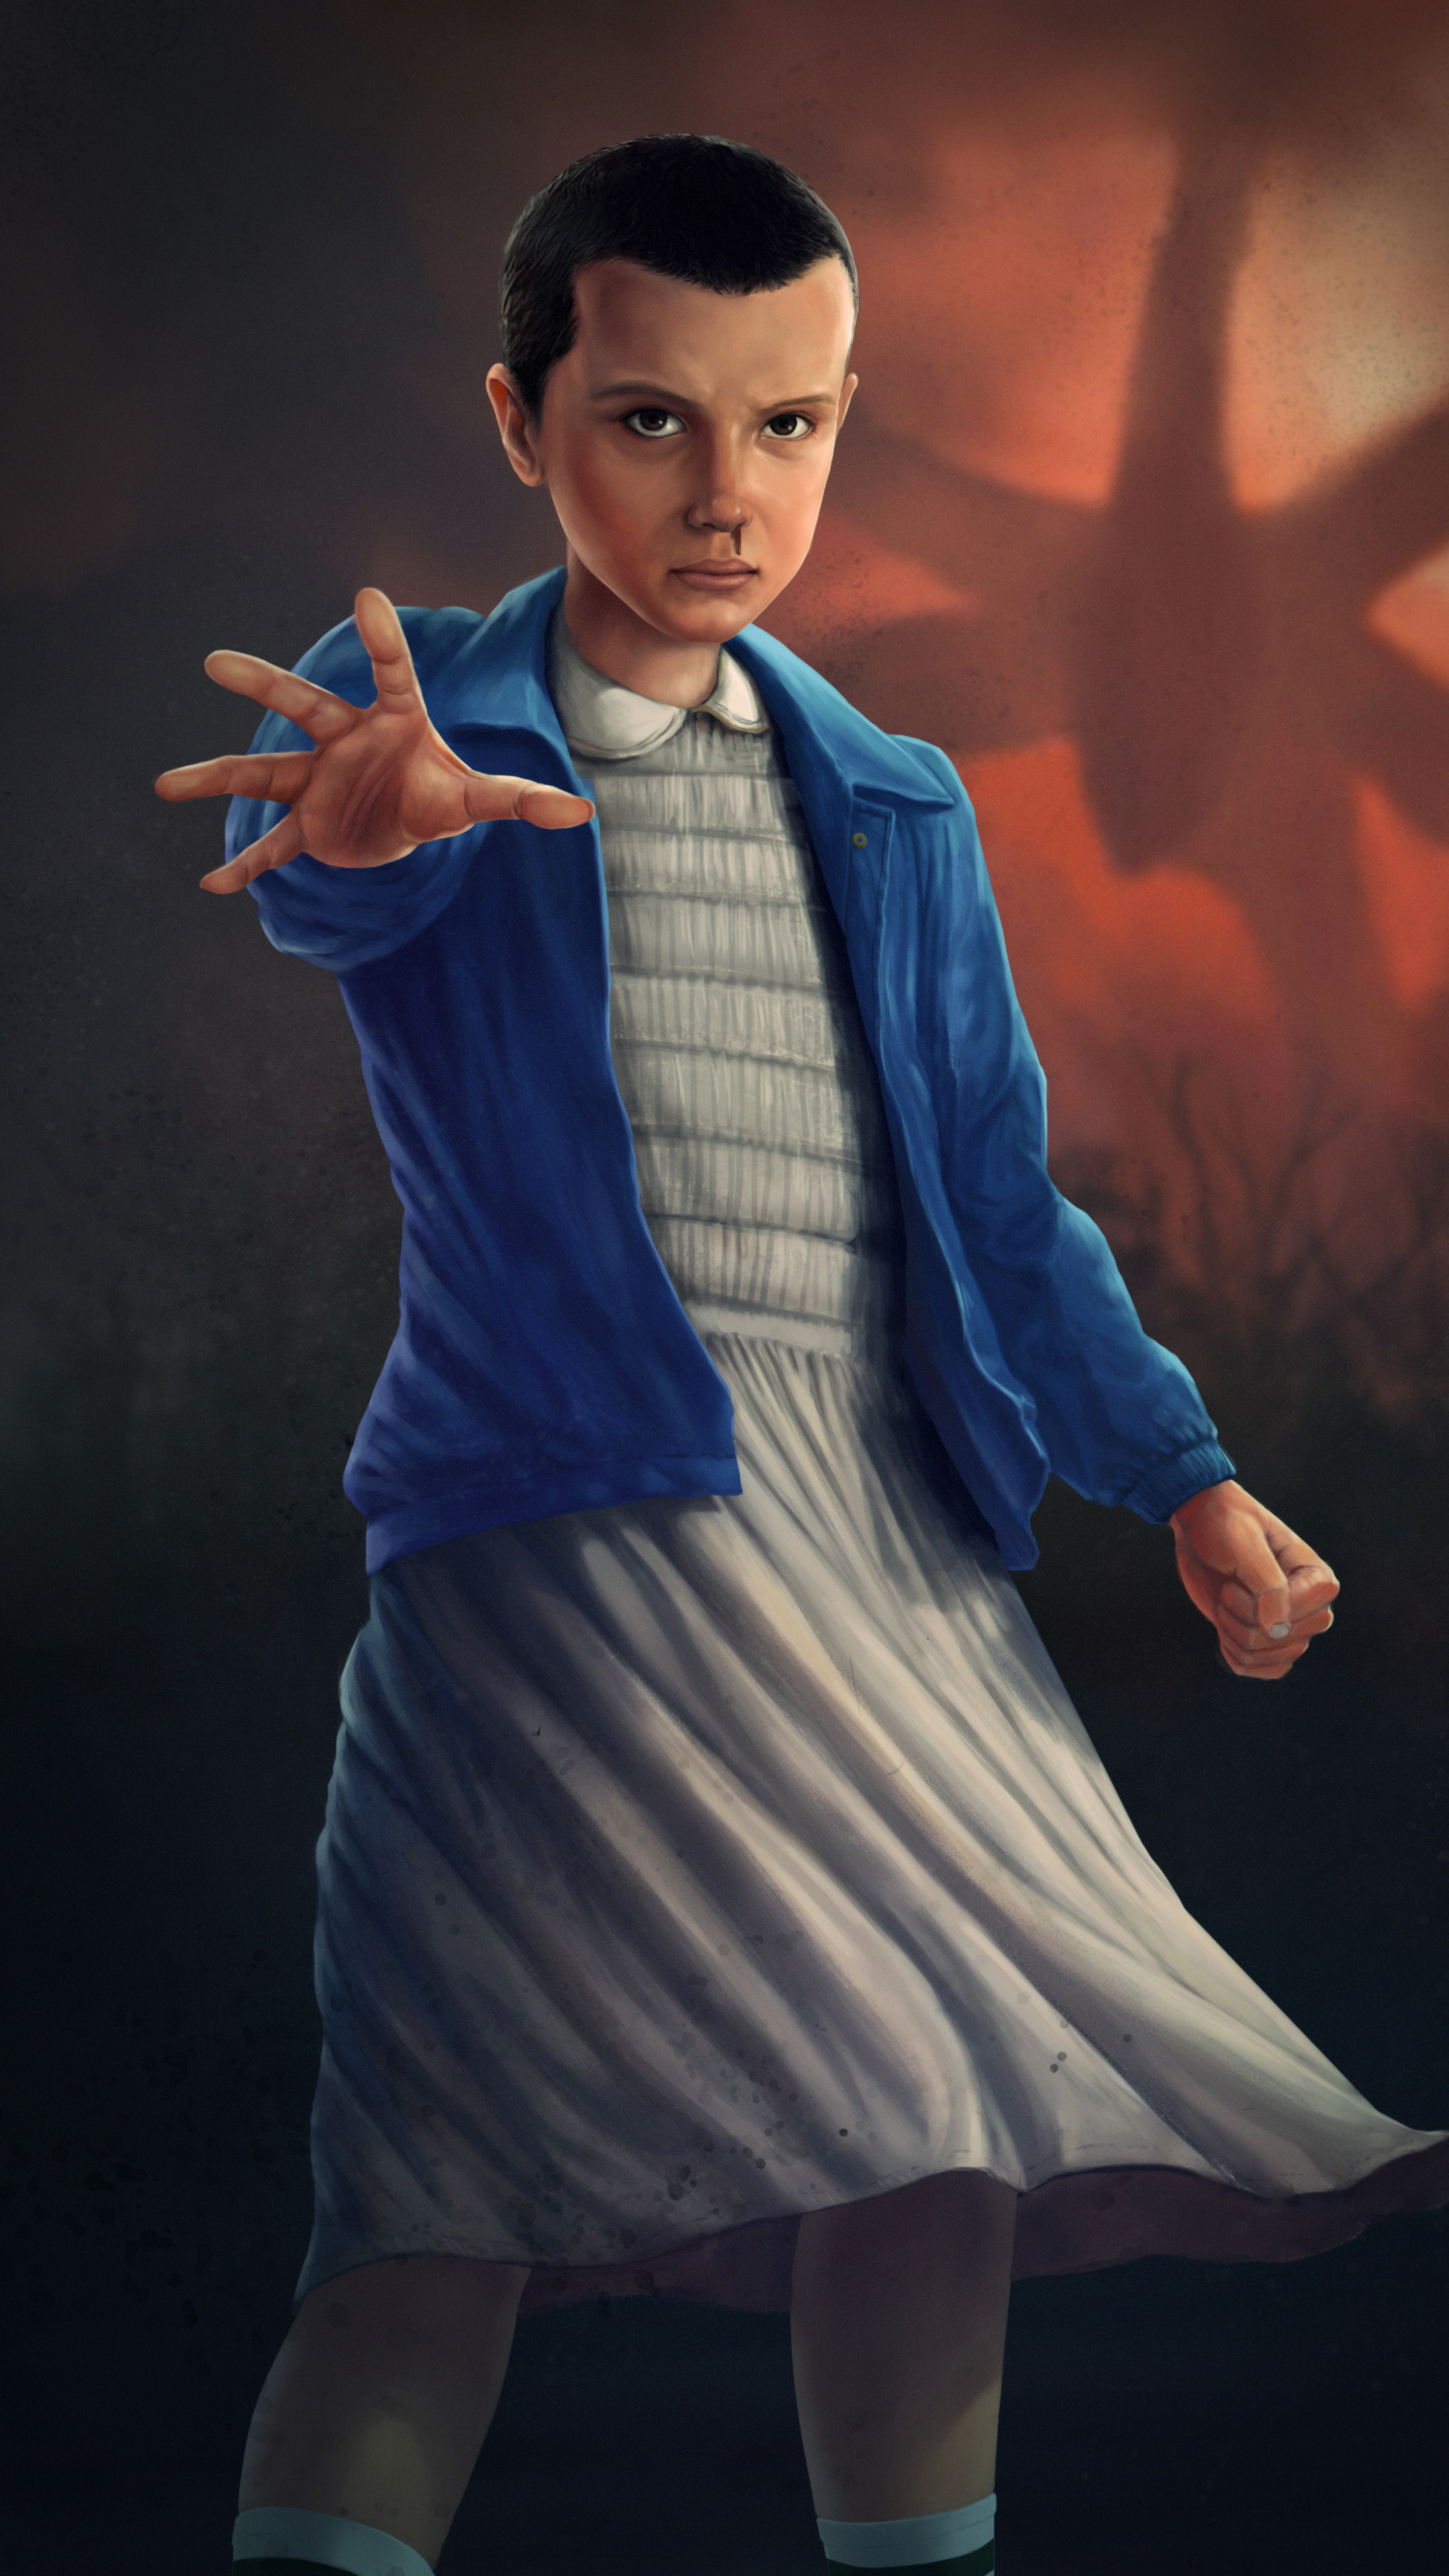 Stranger Things character, Eleven, Sony Xperia wallpapers, Digital art, 2160x3840 4K Handy